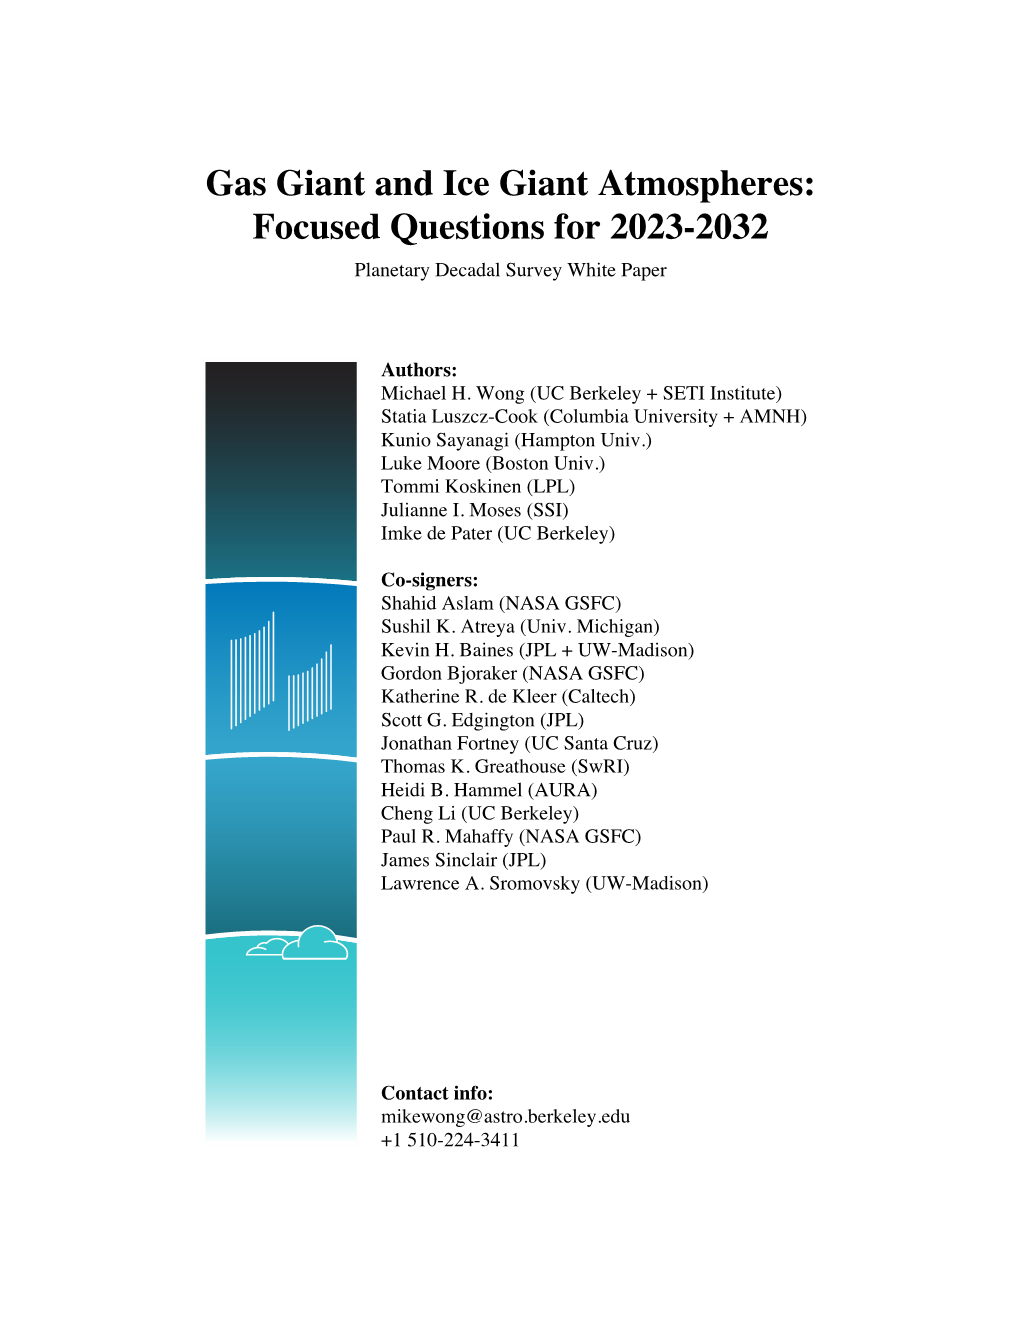 Gas Giant and Ice Giant Atmospheres: Focused Questions for 2023-2032 Planetary Decadal Survey White Paper